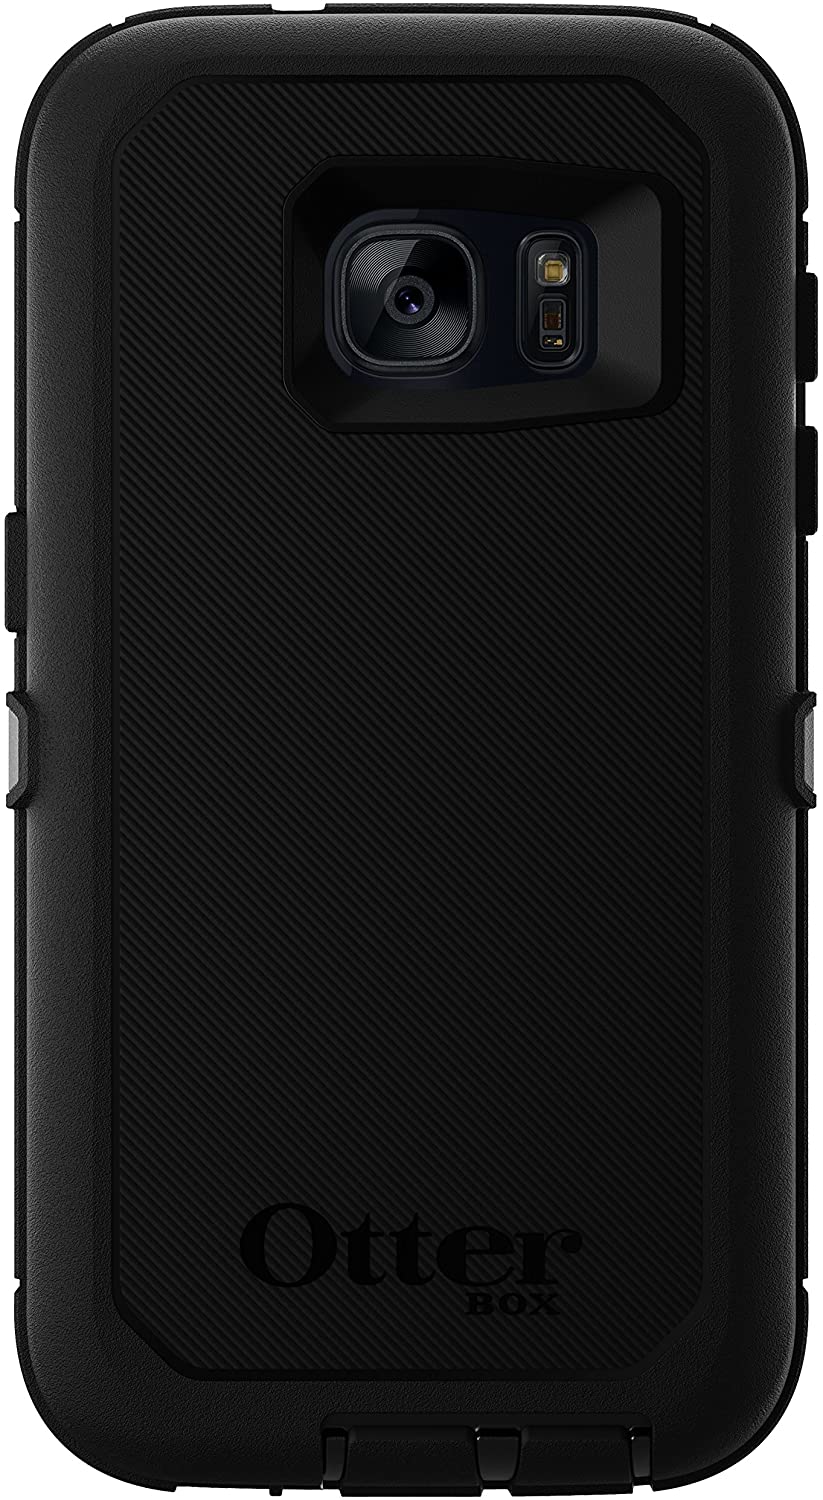 OtterBox Defender Series Case for Samsung Galaxy s7 - Retail Packaging - Black